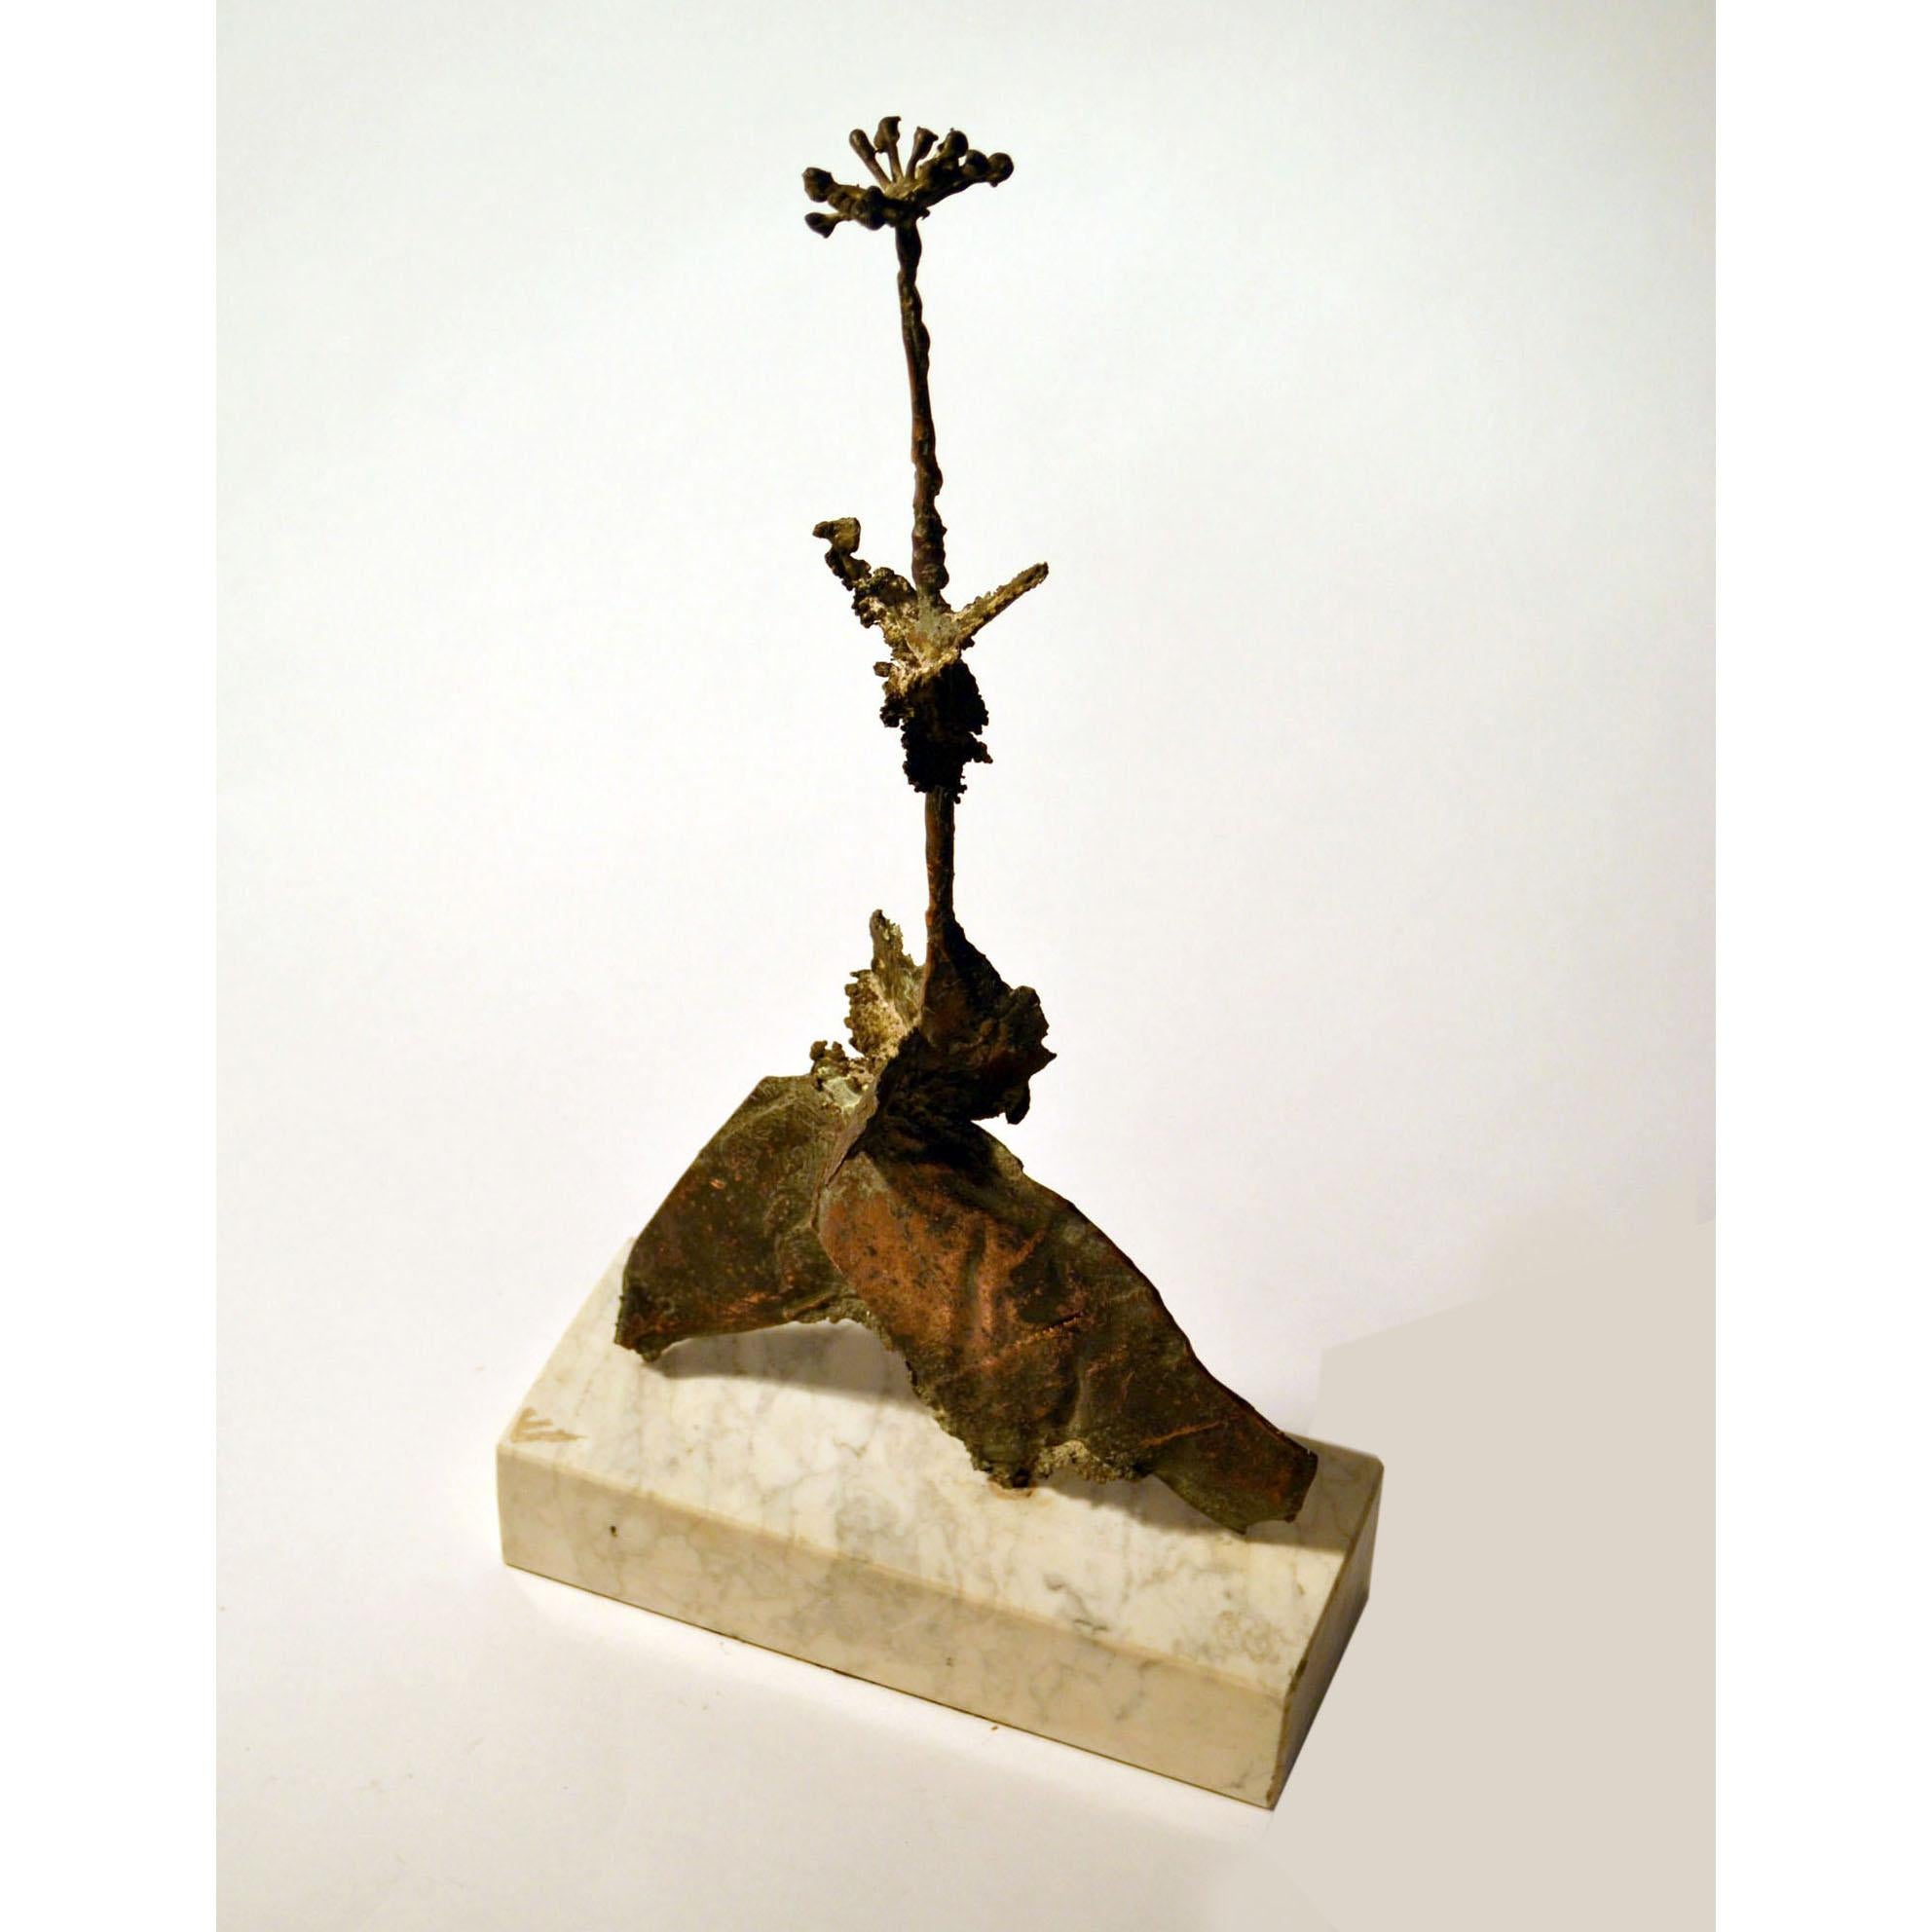 Brutalist bronze sculpture of a dried flower on marble base.